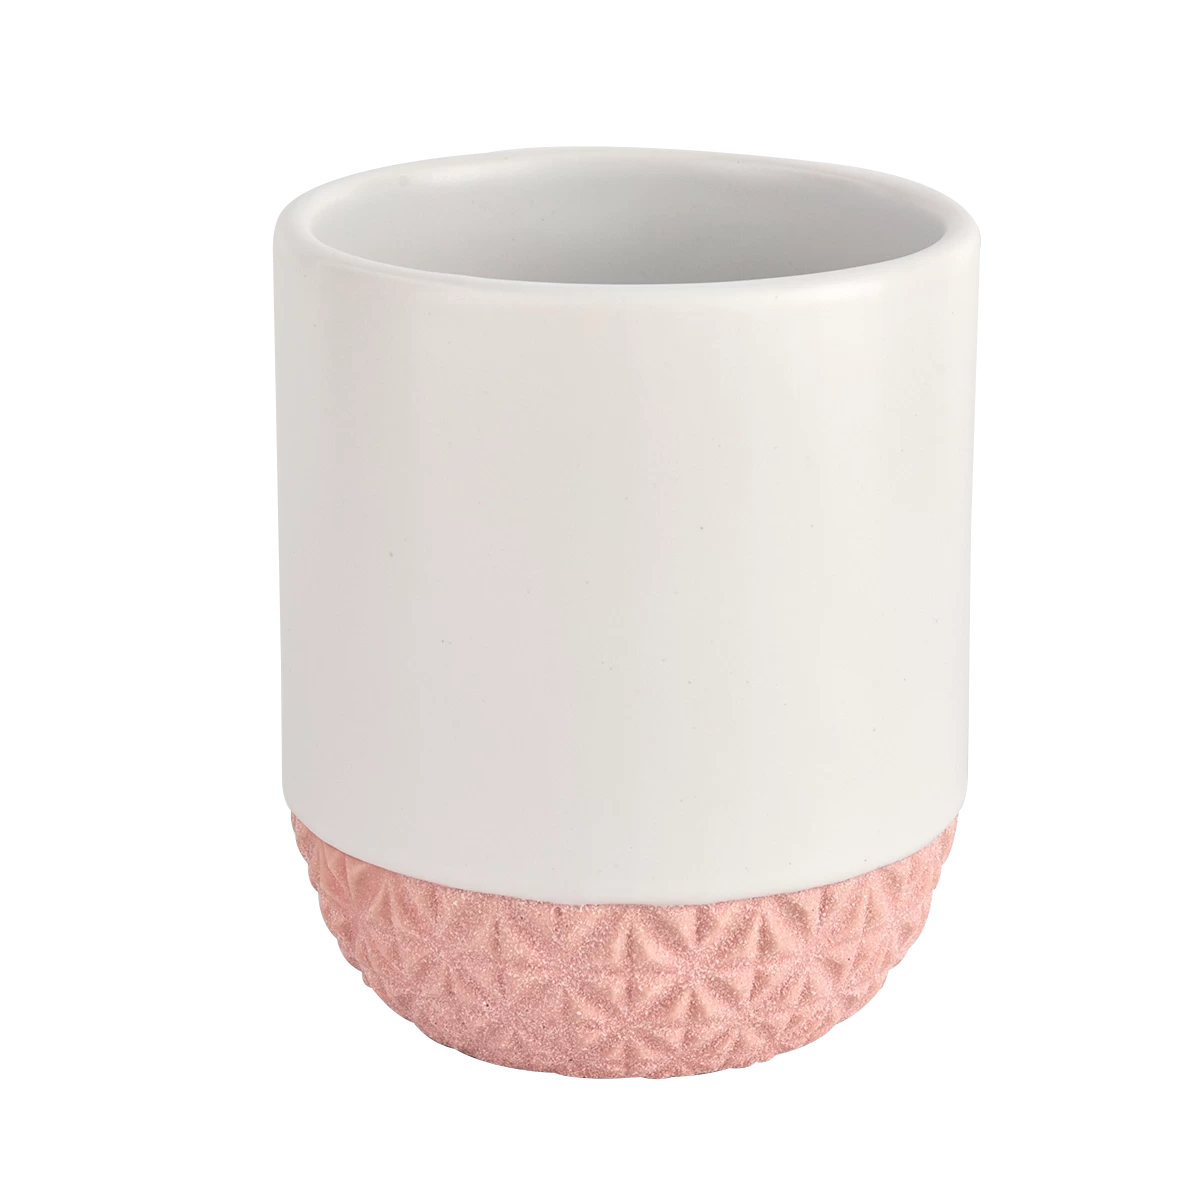 Luxury decorative pink bottom ceramic candle jars for candle vessel